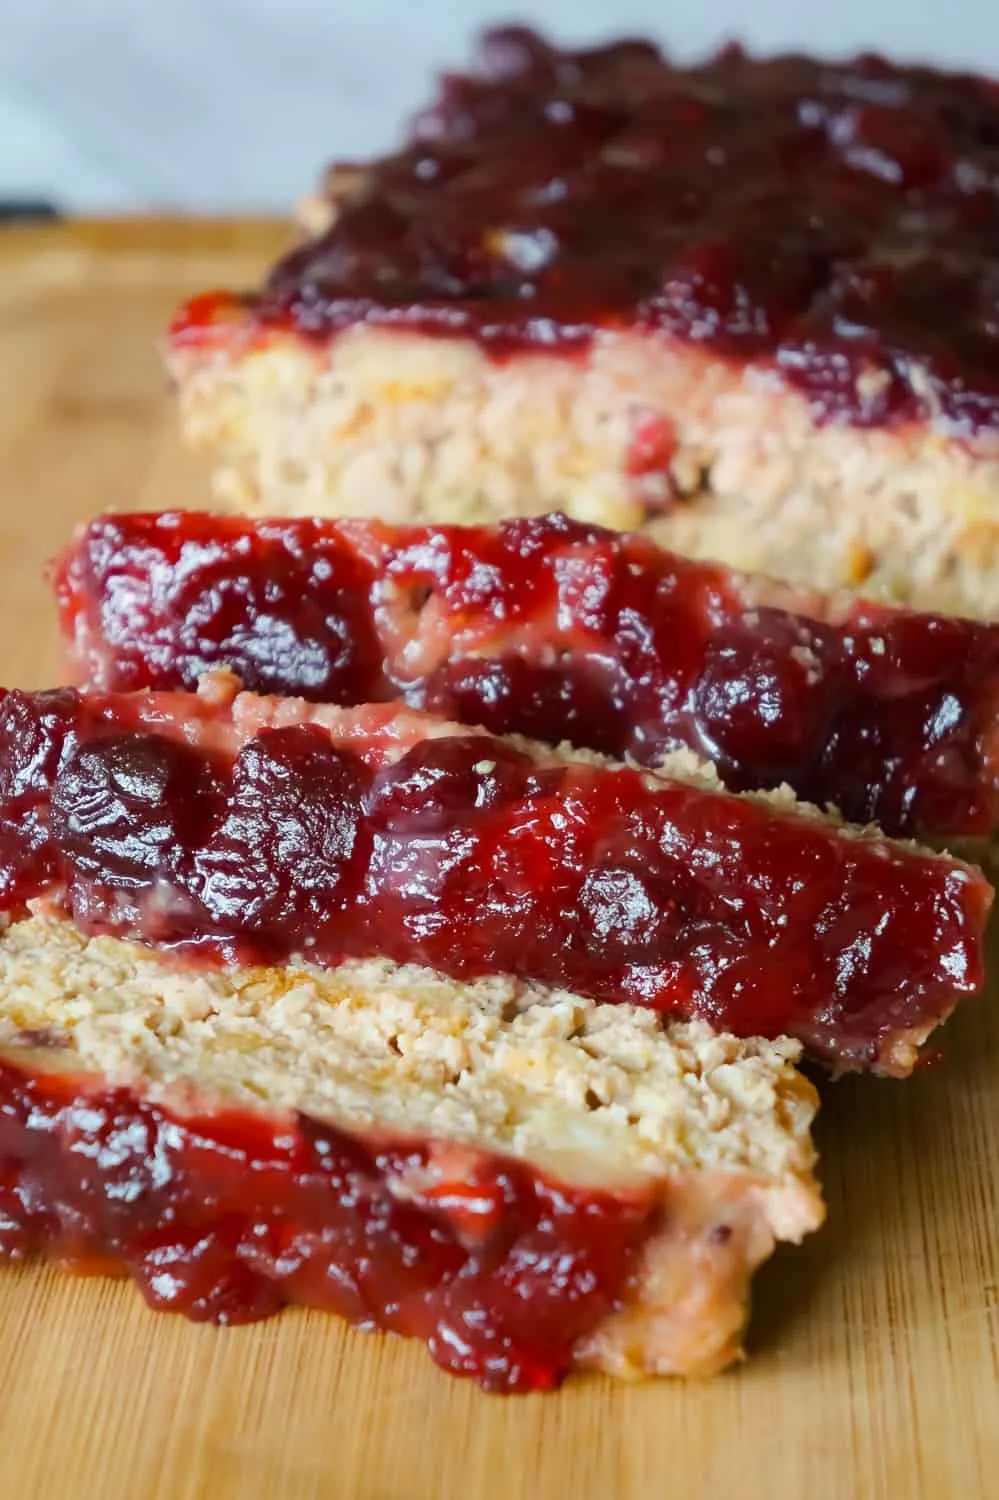 Turkey Meatloaf is an easy ground turkey recipe packed with all the flavours of Thanksgiving. This 2 pound turkey meatloaf is made with Stove Top stuffing and topped with cranberry sauce.